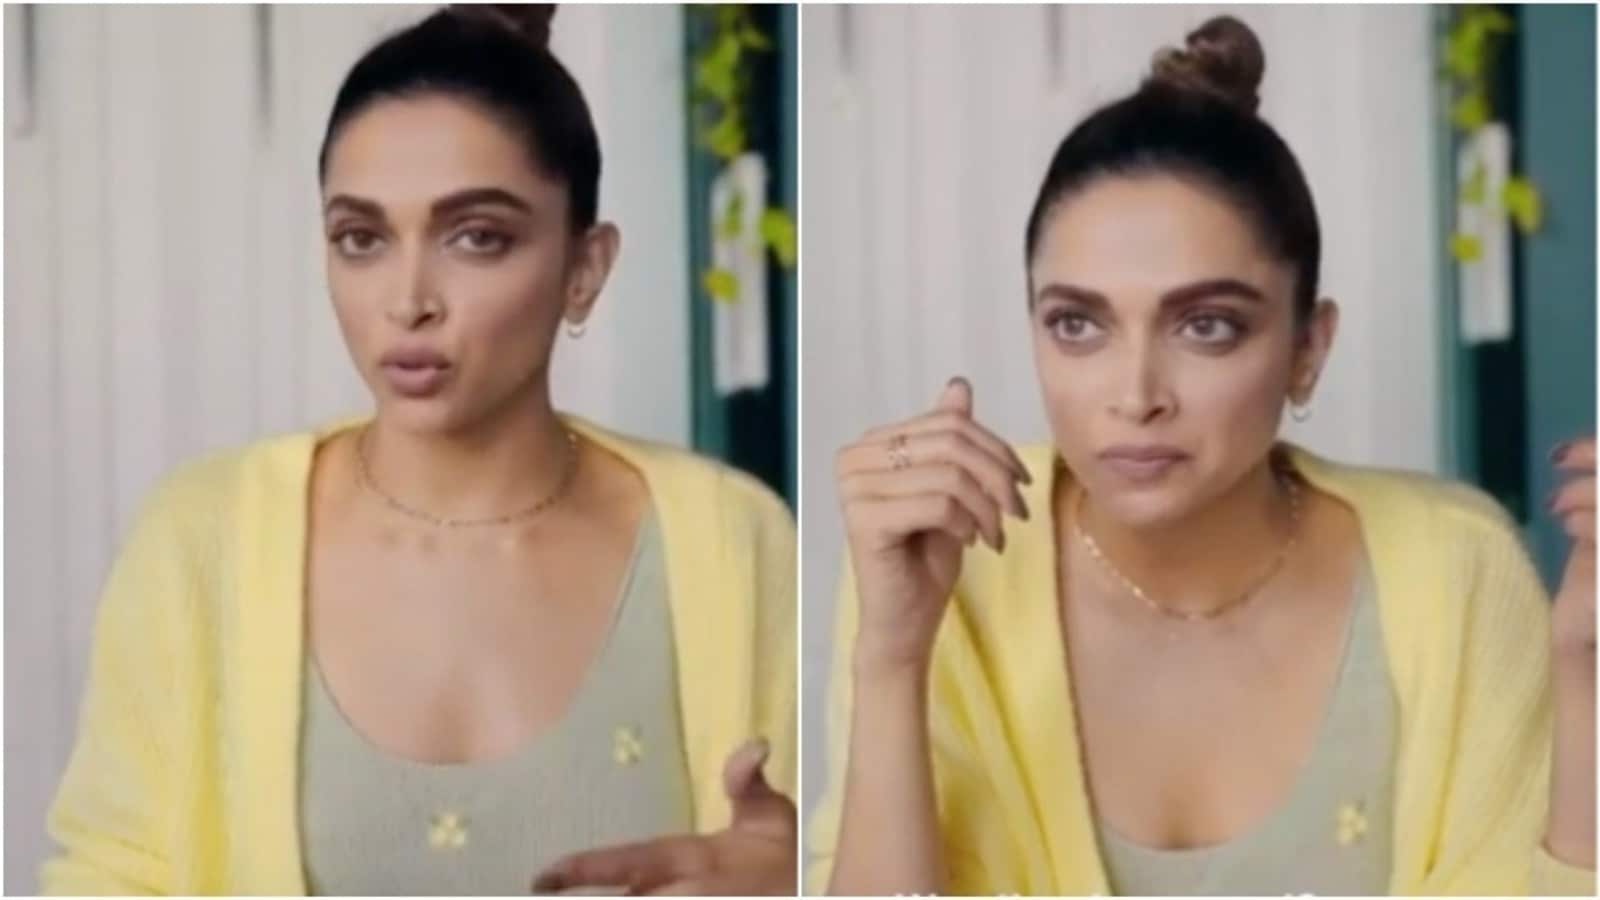 Deepika Padukone on Her Rise from Actordom to Stardom, High Fashion  Partnerships, and Self-Care